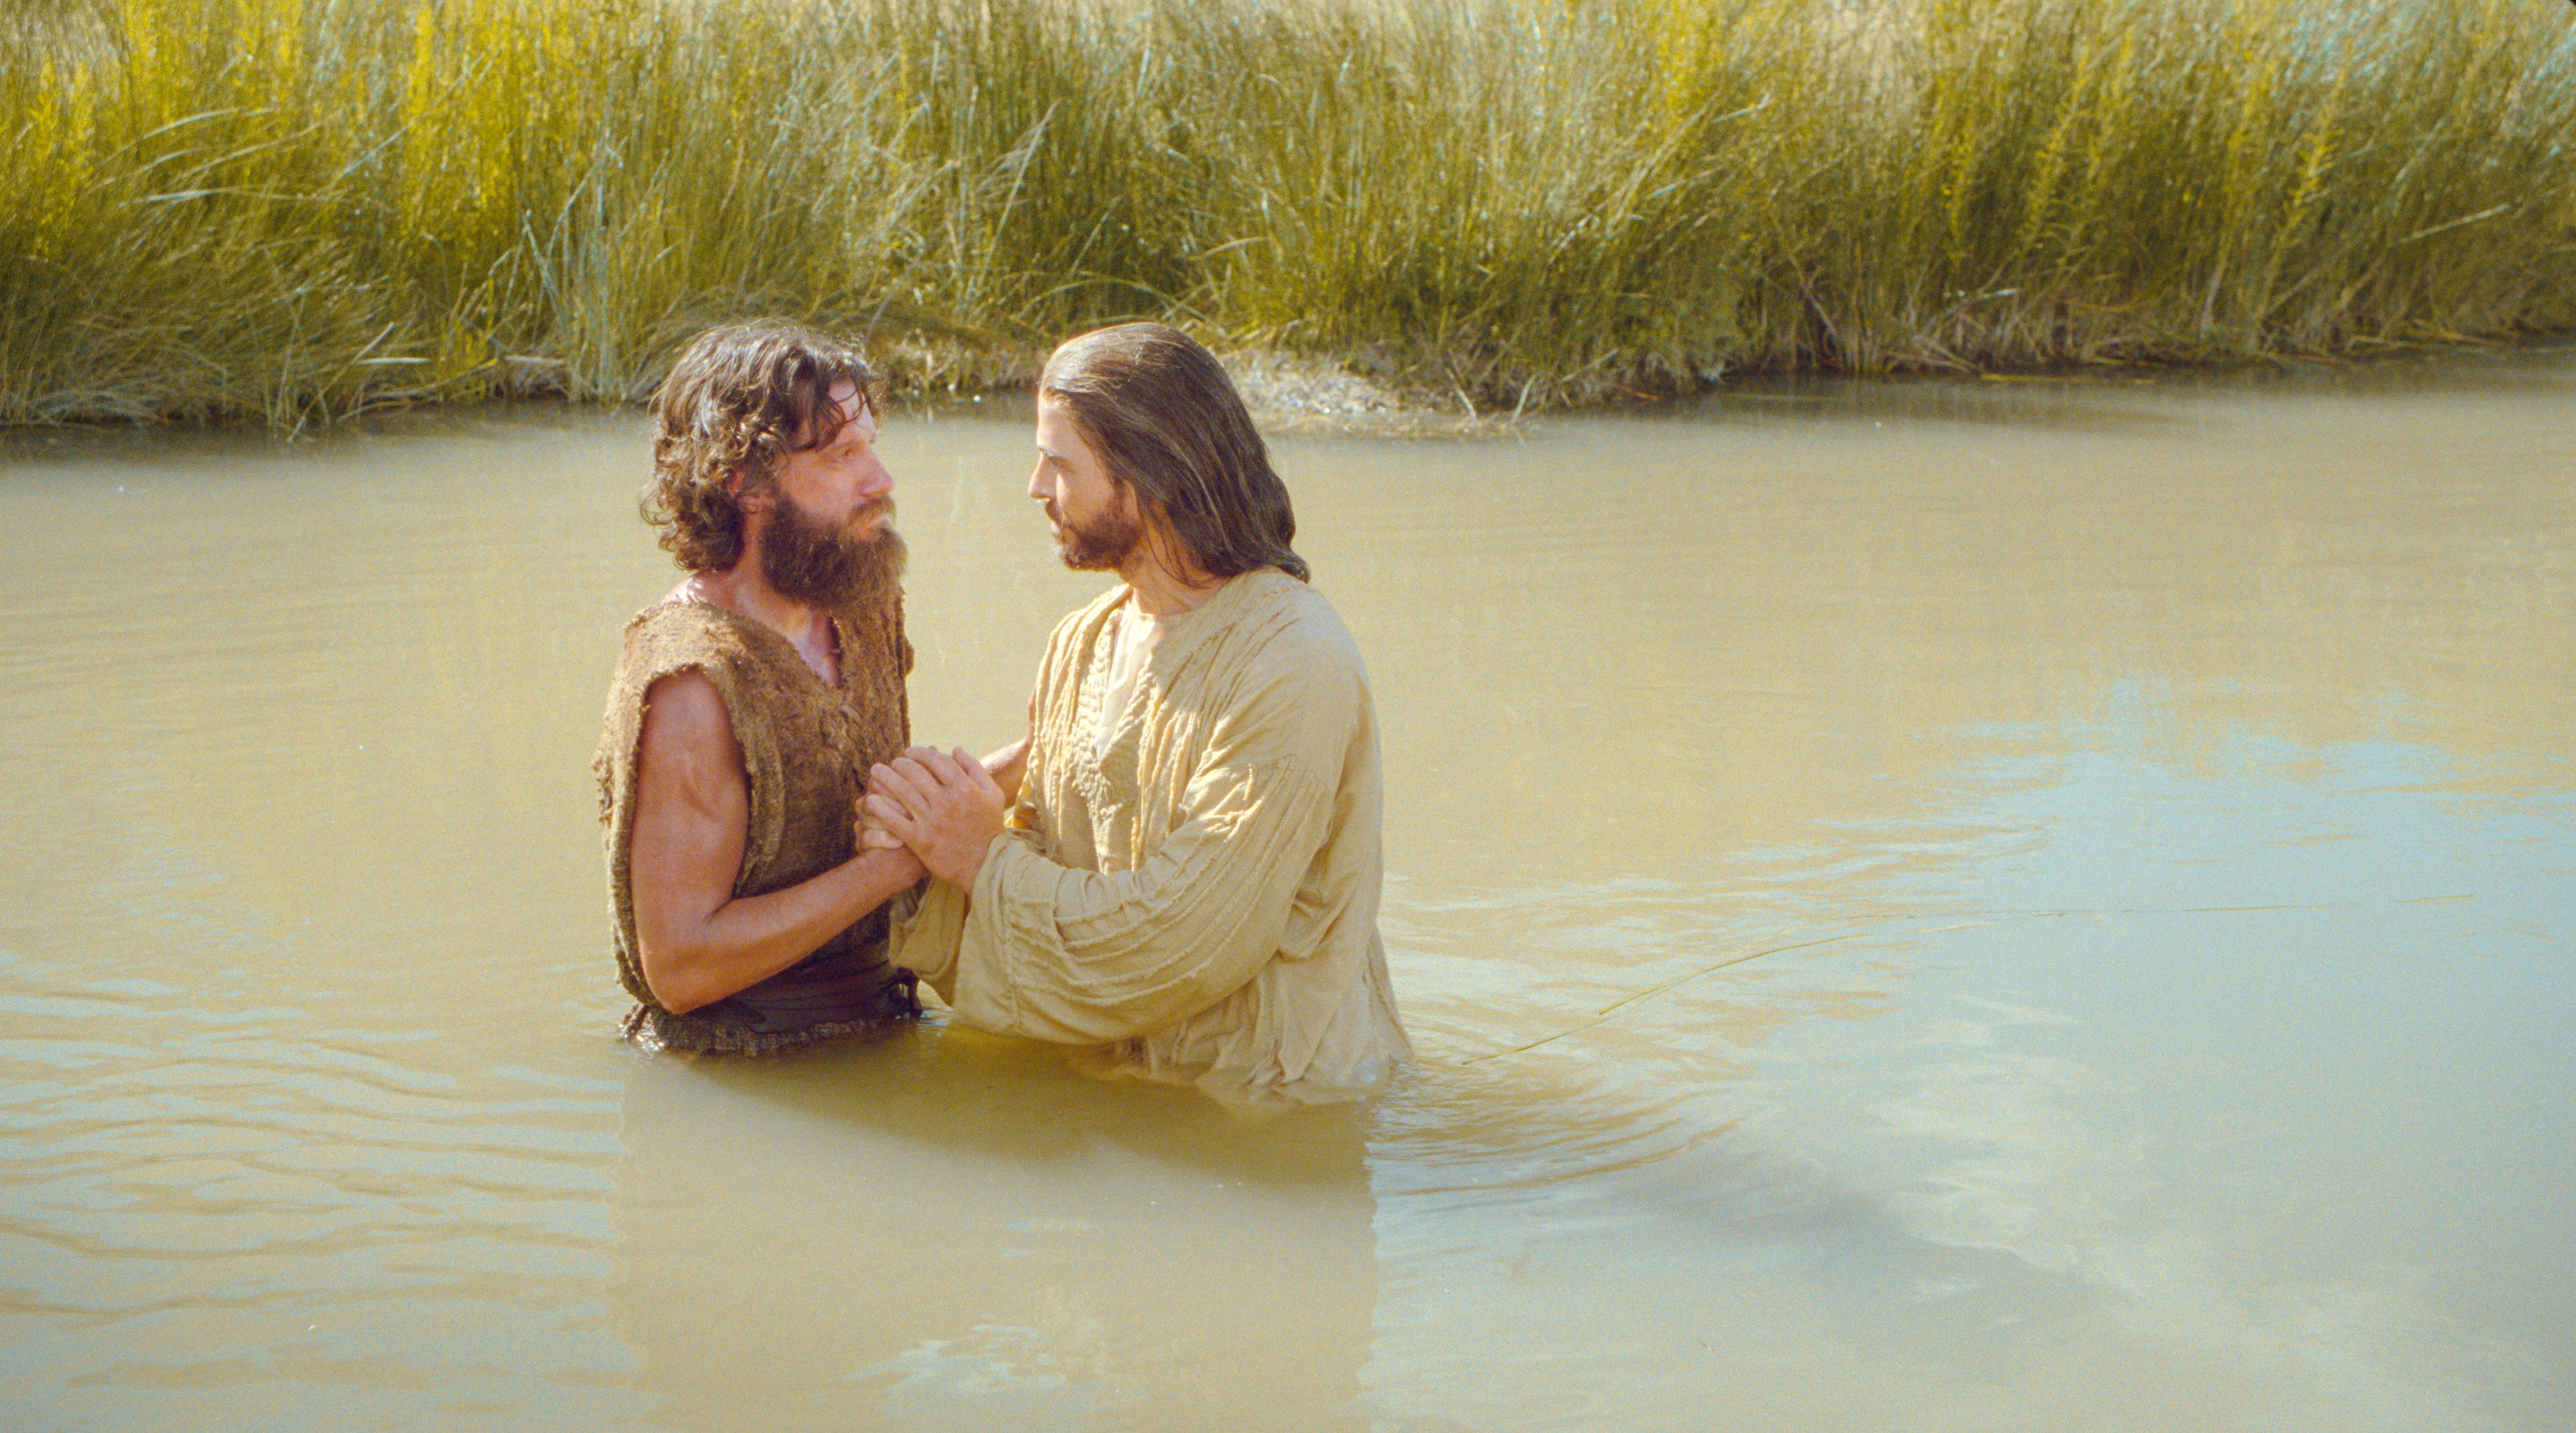 As Jesus enters the water to be baptized, John declares that he must be baptized by Jesus. Jesus responds that He must be baptized to fulfill all righteousness.